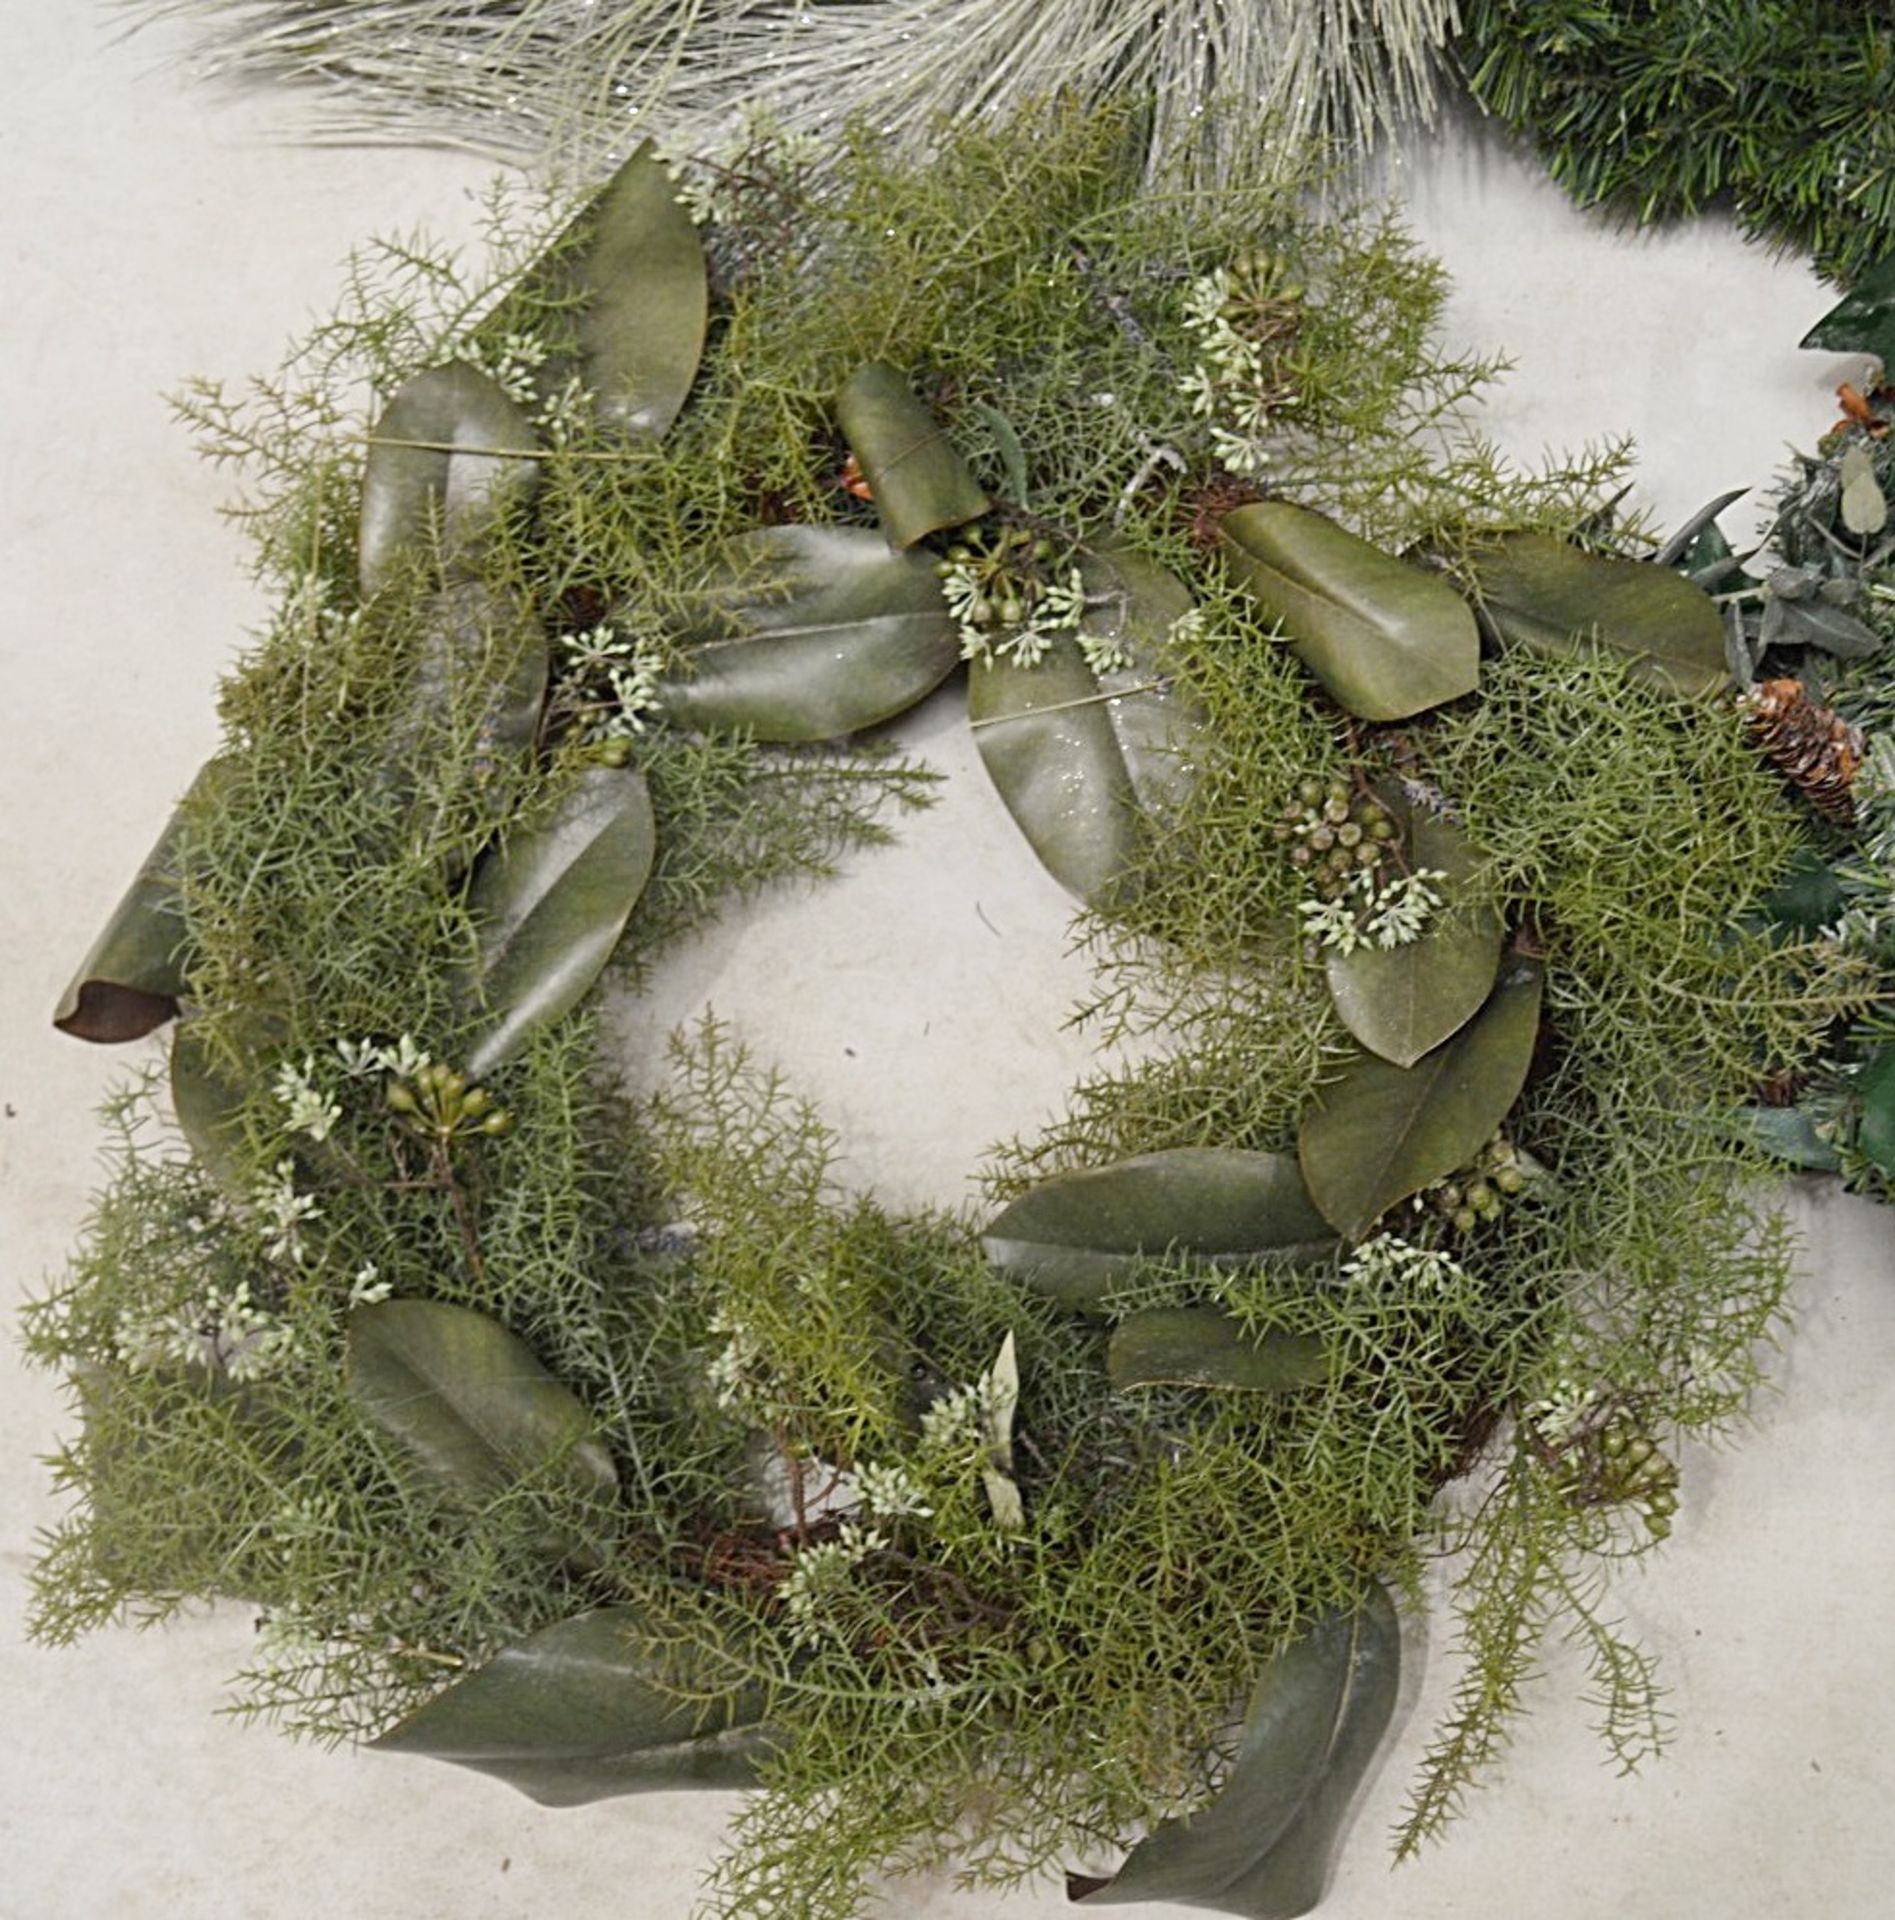 5 x Commercial Decorative Christmas Wreaths - Variety As Shown - Mostly 50cm In Diameter - Ex- - Image 4 of 5